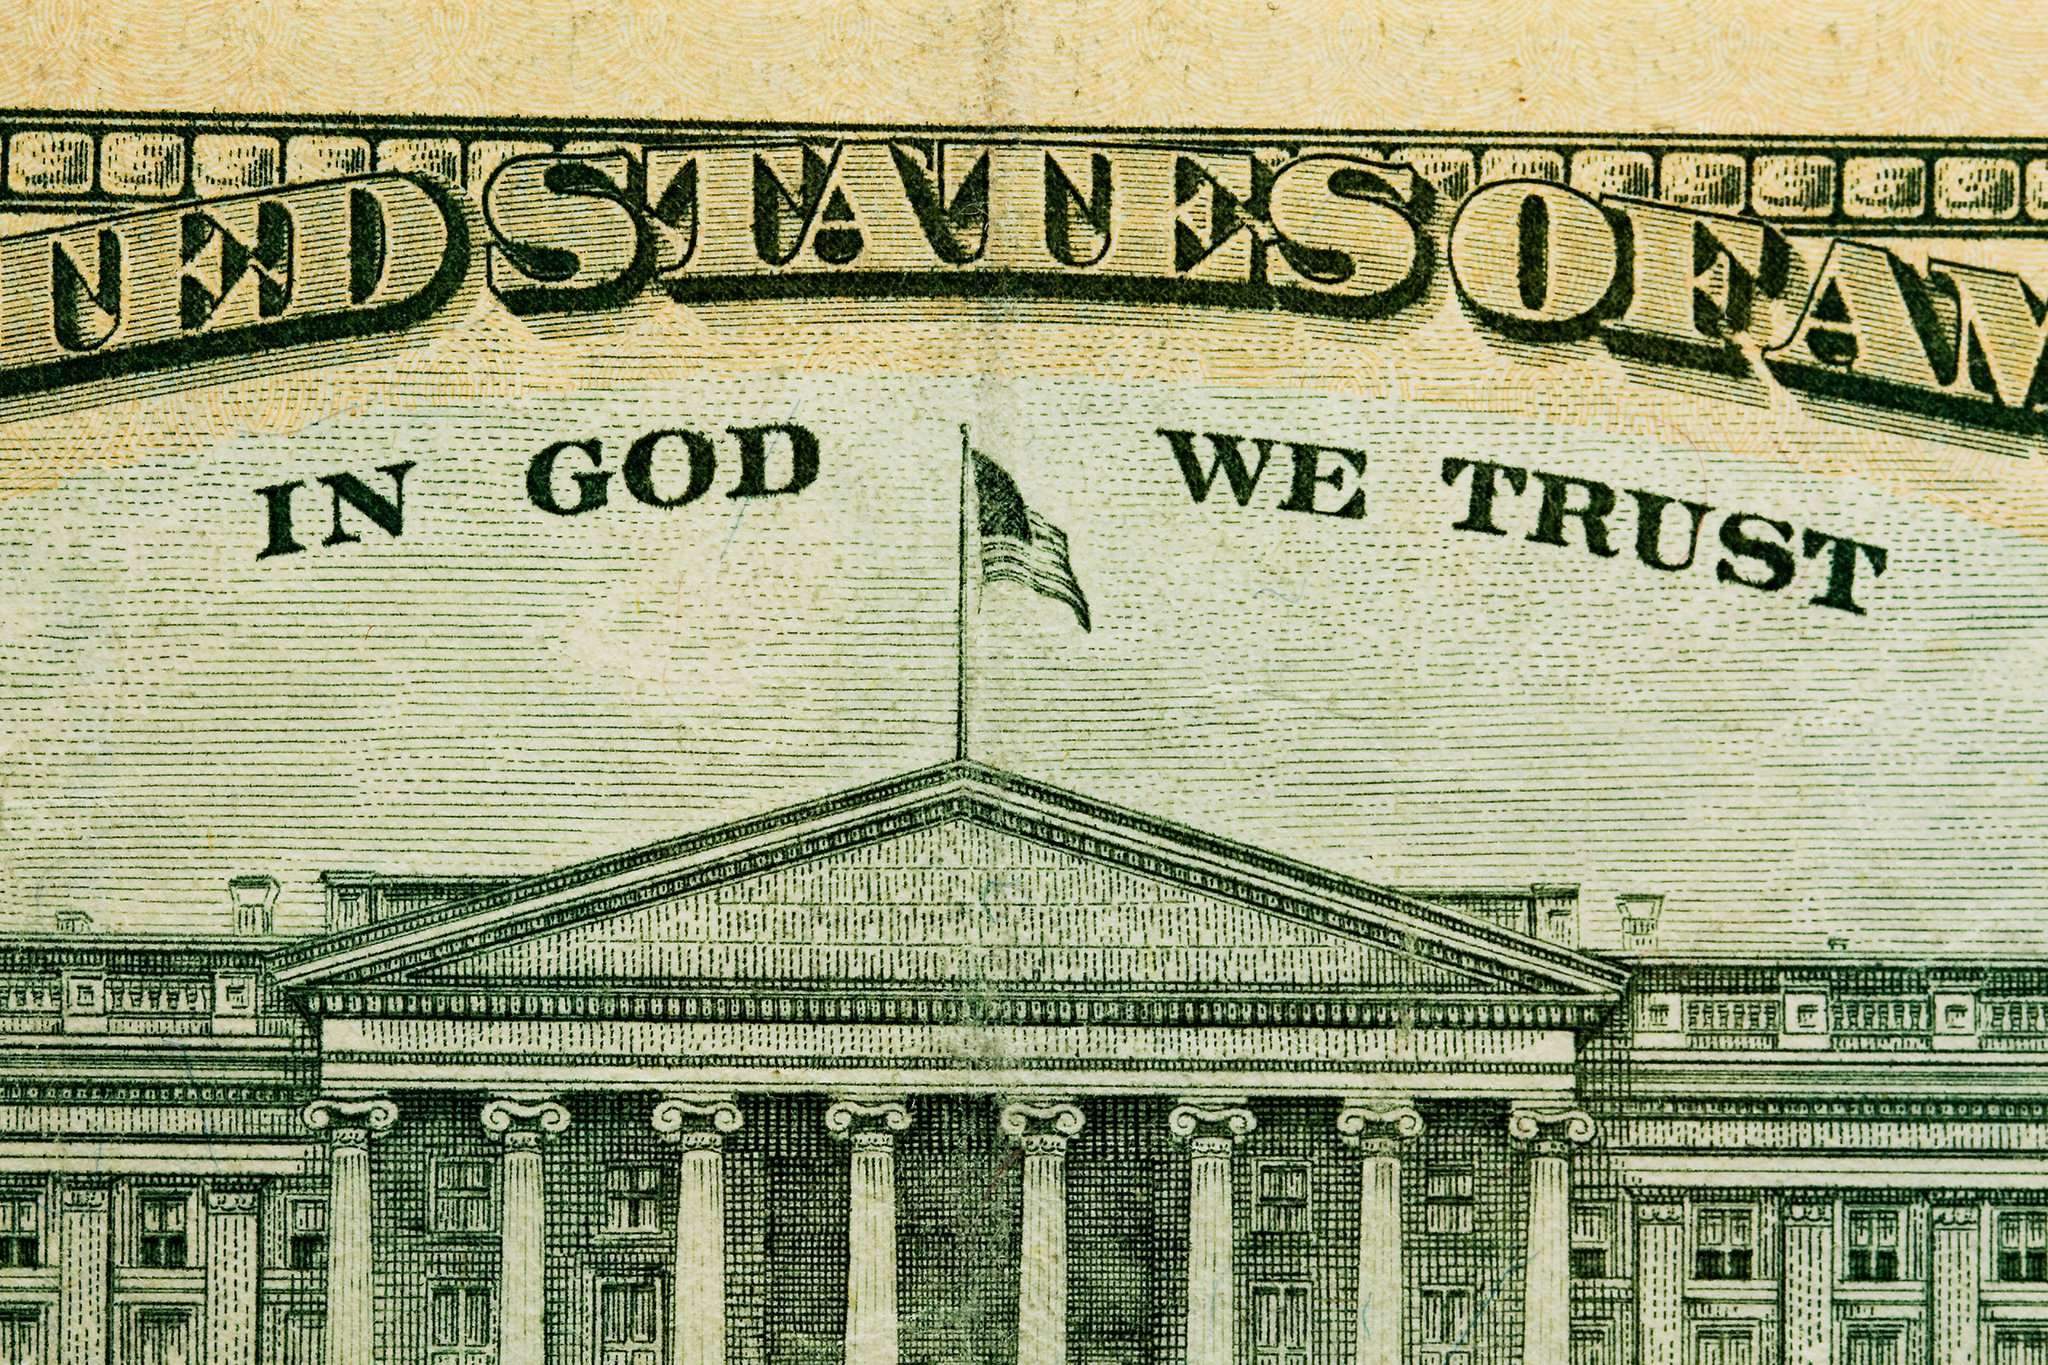 Dollars out on top on god. In God we Trust доллар купюра. In God we Trust на долларе. Купюра США “in God we Trust”. Надпись на долларе in God we Trust.